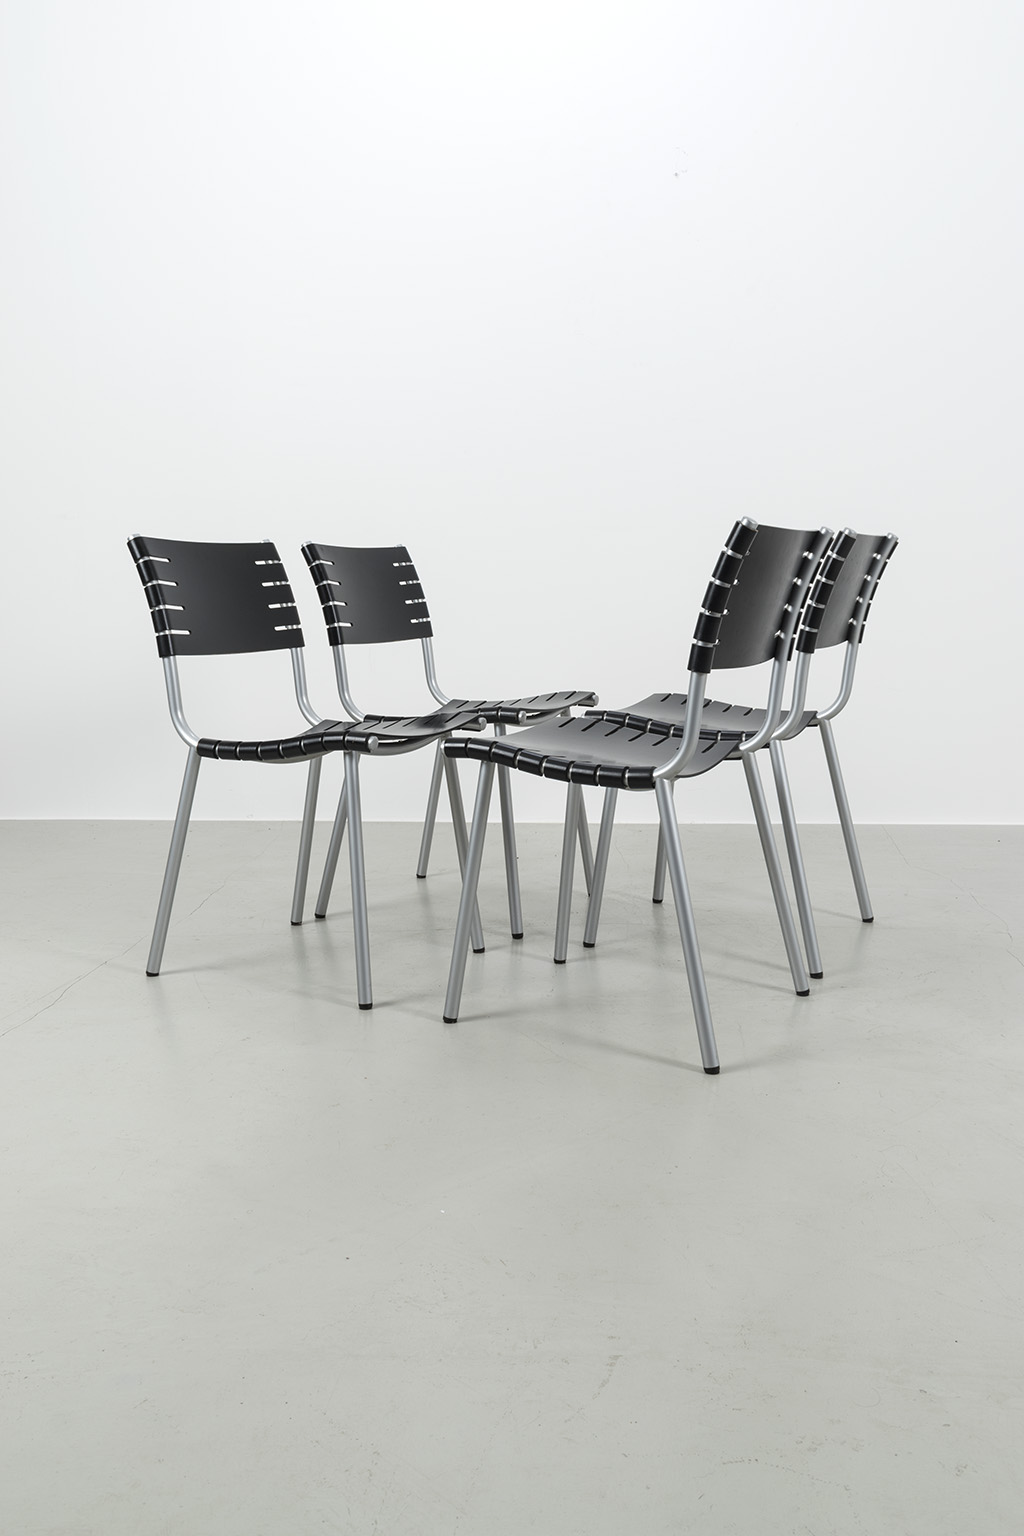 Set of 4 chairs by Harvink